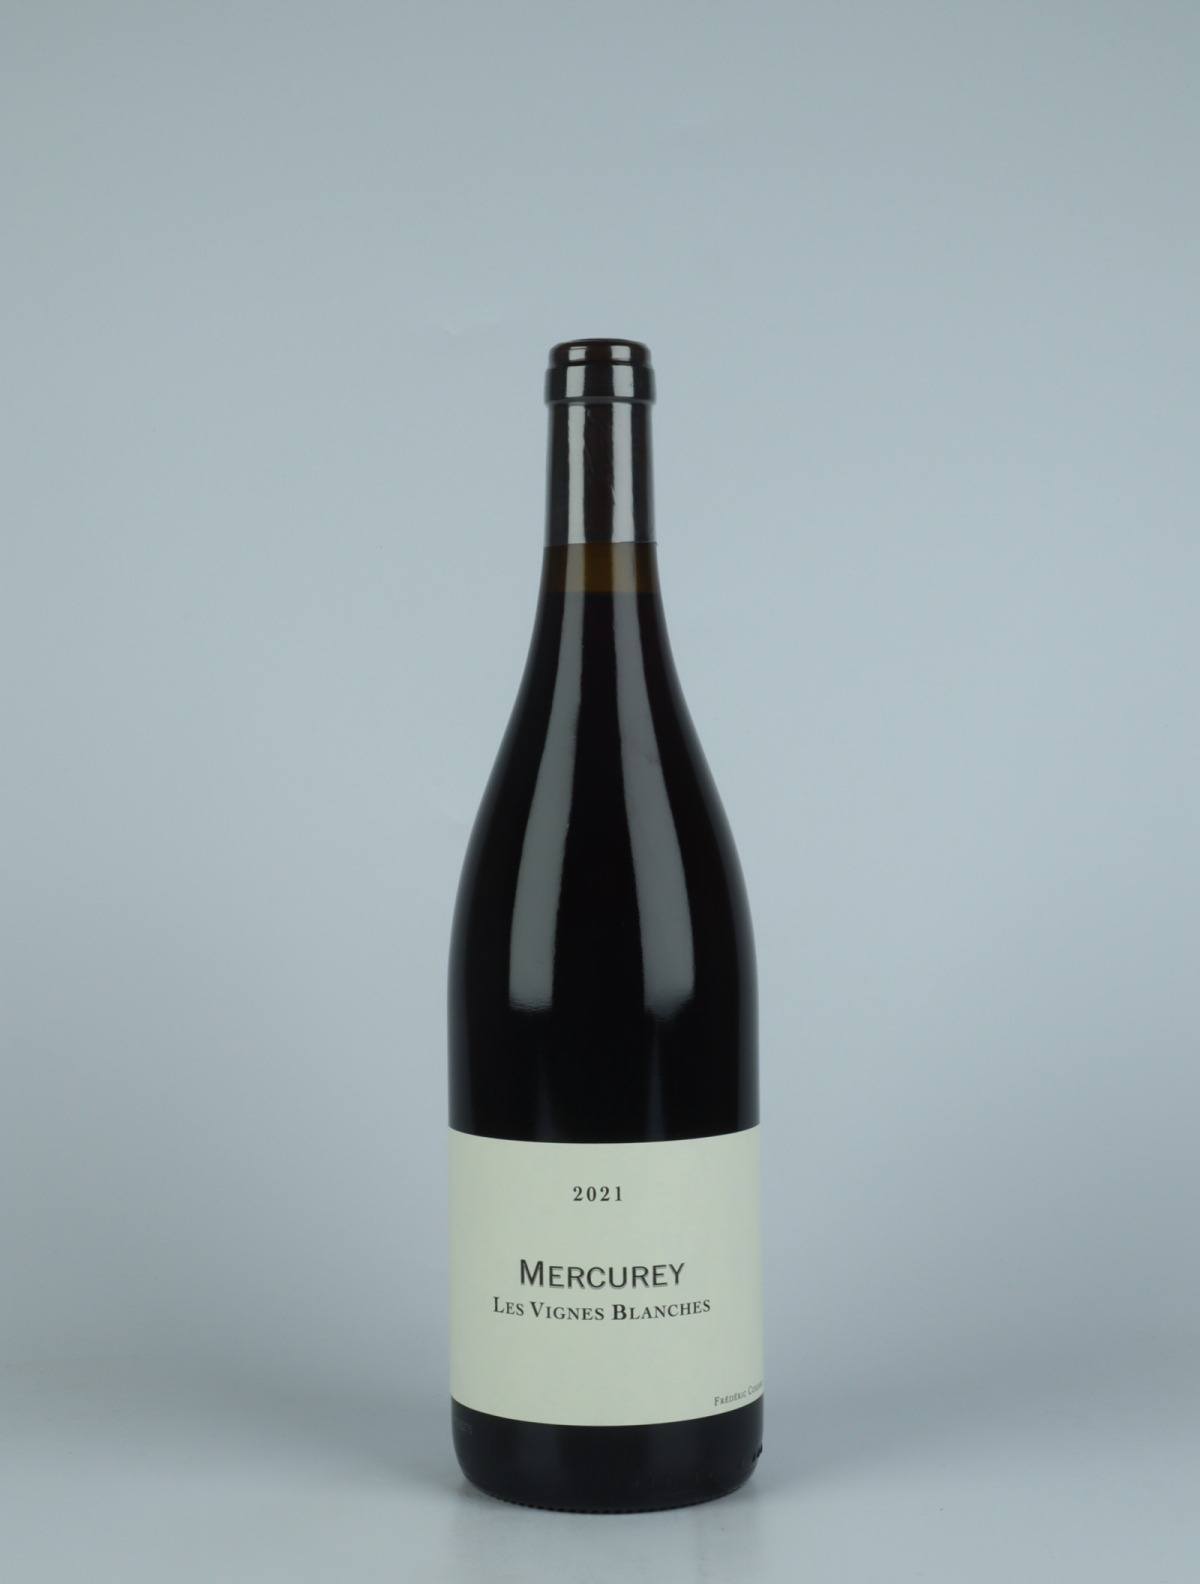 A bottle 2021 Mercurey - Les Vignes Blanches - Qvevris Red wine from Frédéric Cossard, Burgundy in France